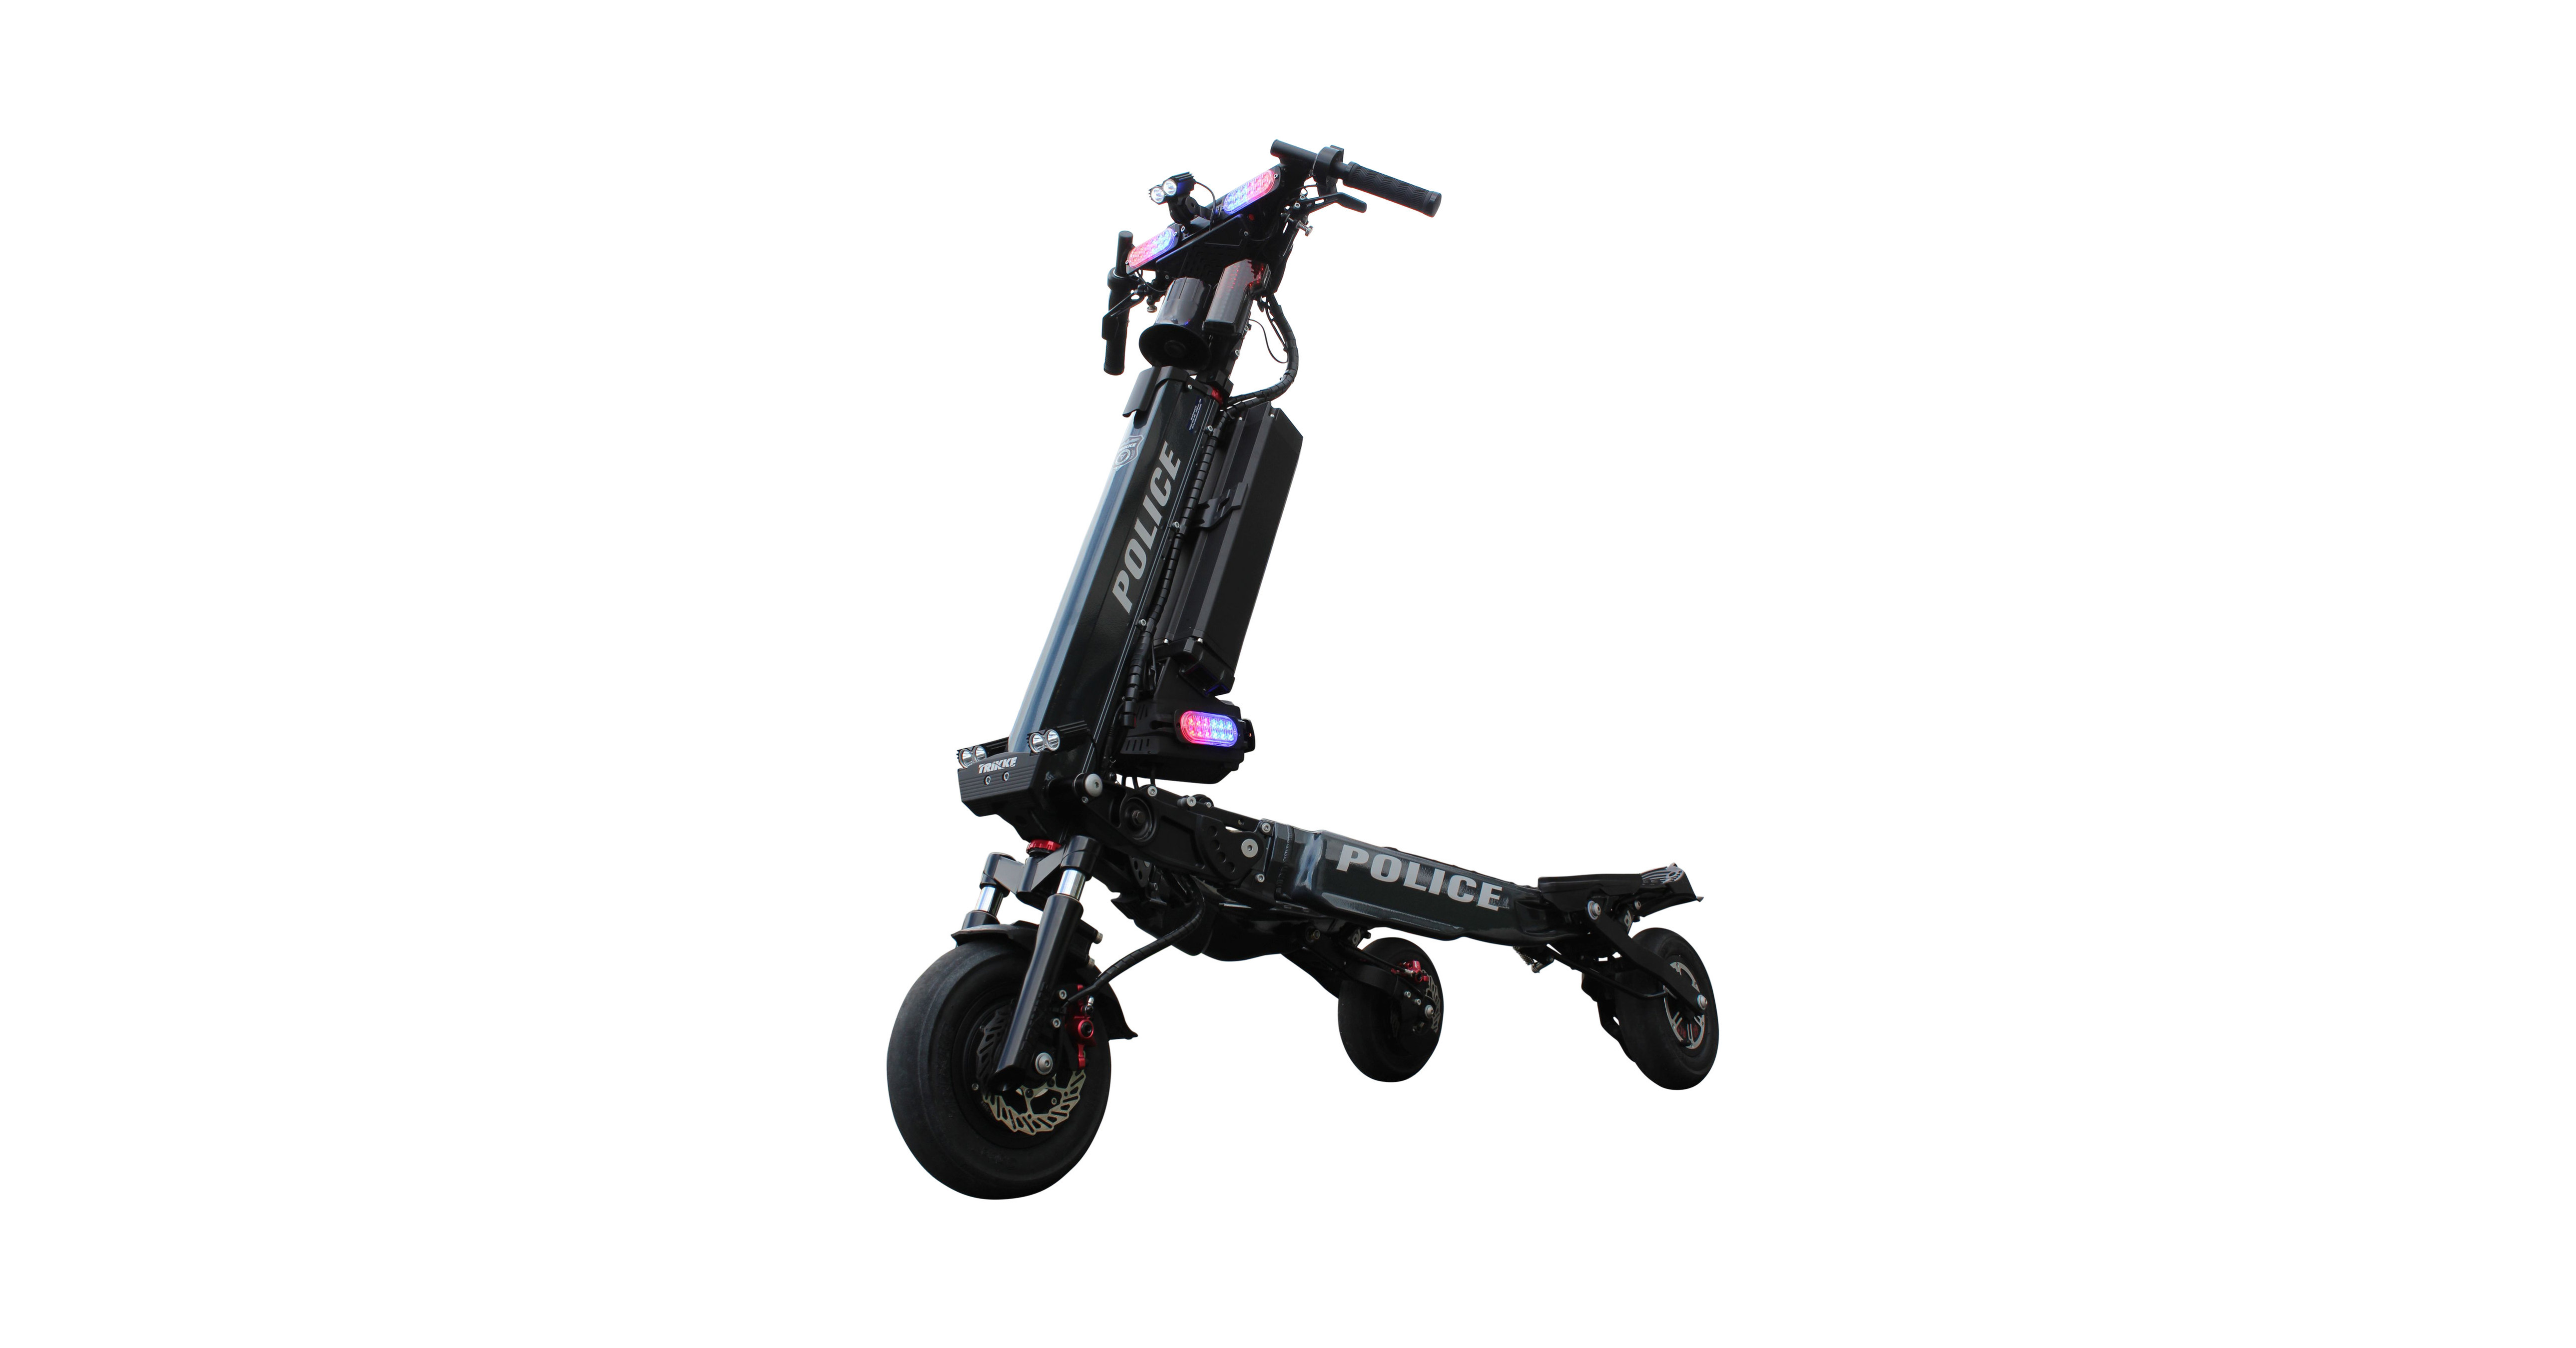 Trikke Tech Celebrates the Rapid Growth of Its New Trikke Professional